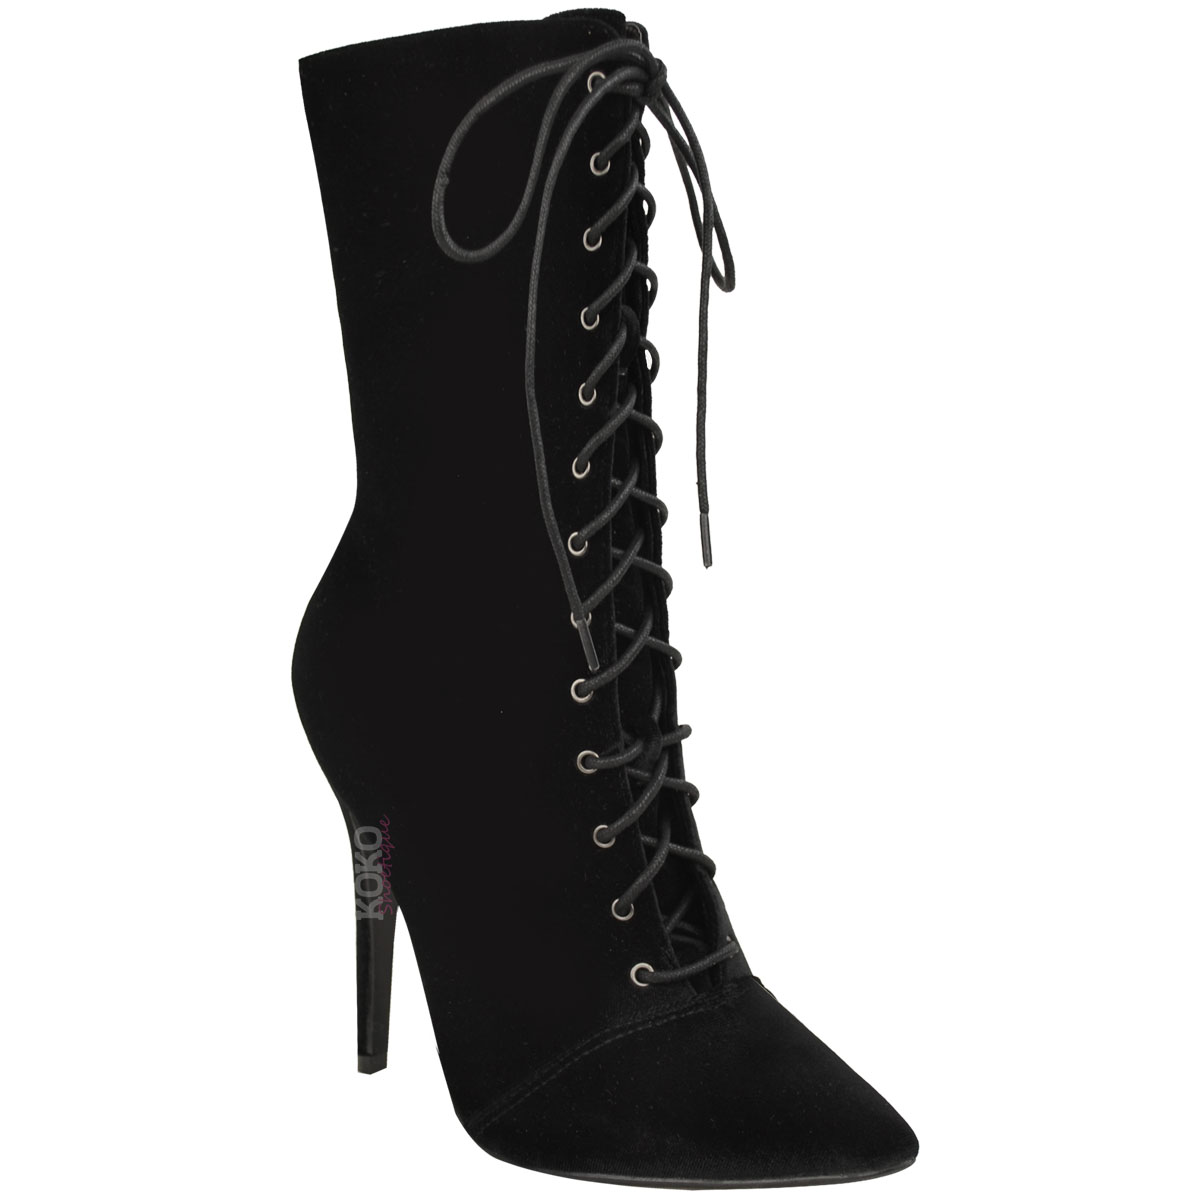 New Womens Ladies Lace Up Velvet High Heel Stiletto Ankle Boots ...